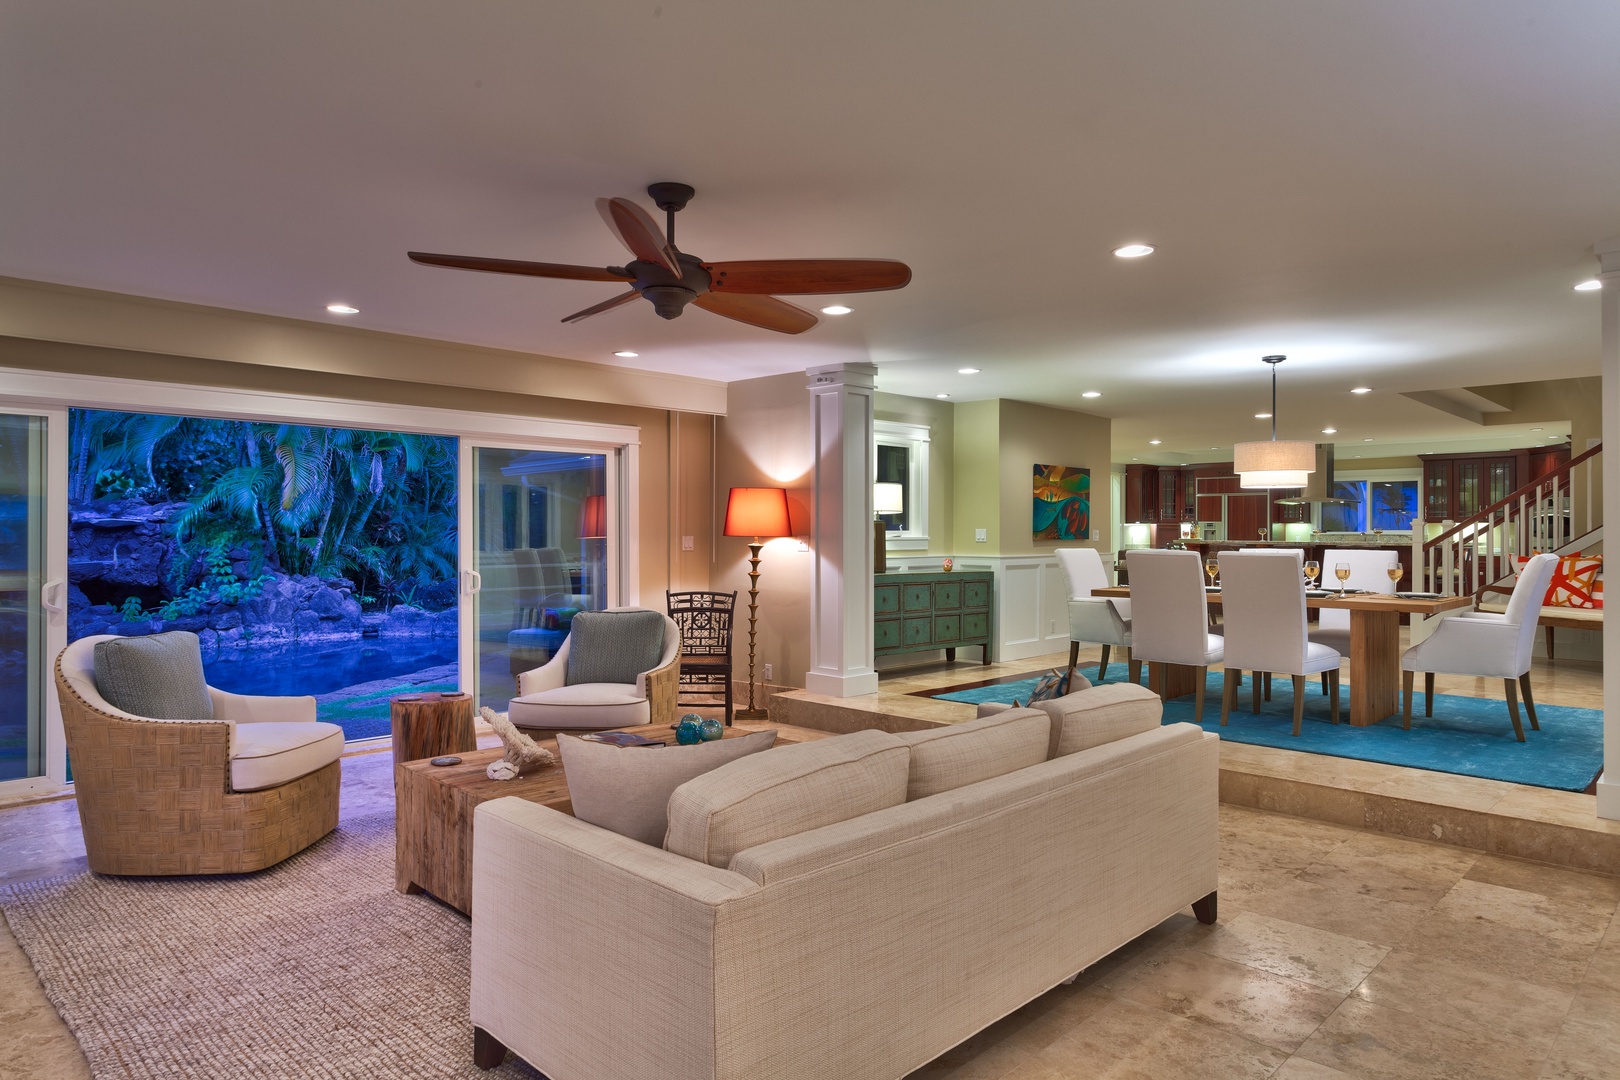 Kailua Vacation Rentals, Maluhia - Views from the front door of the sitting room, pool deck with waterfall, dining room and further is the kitchen.